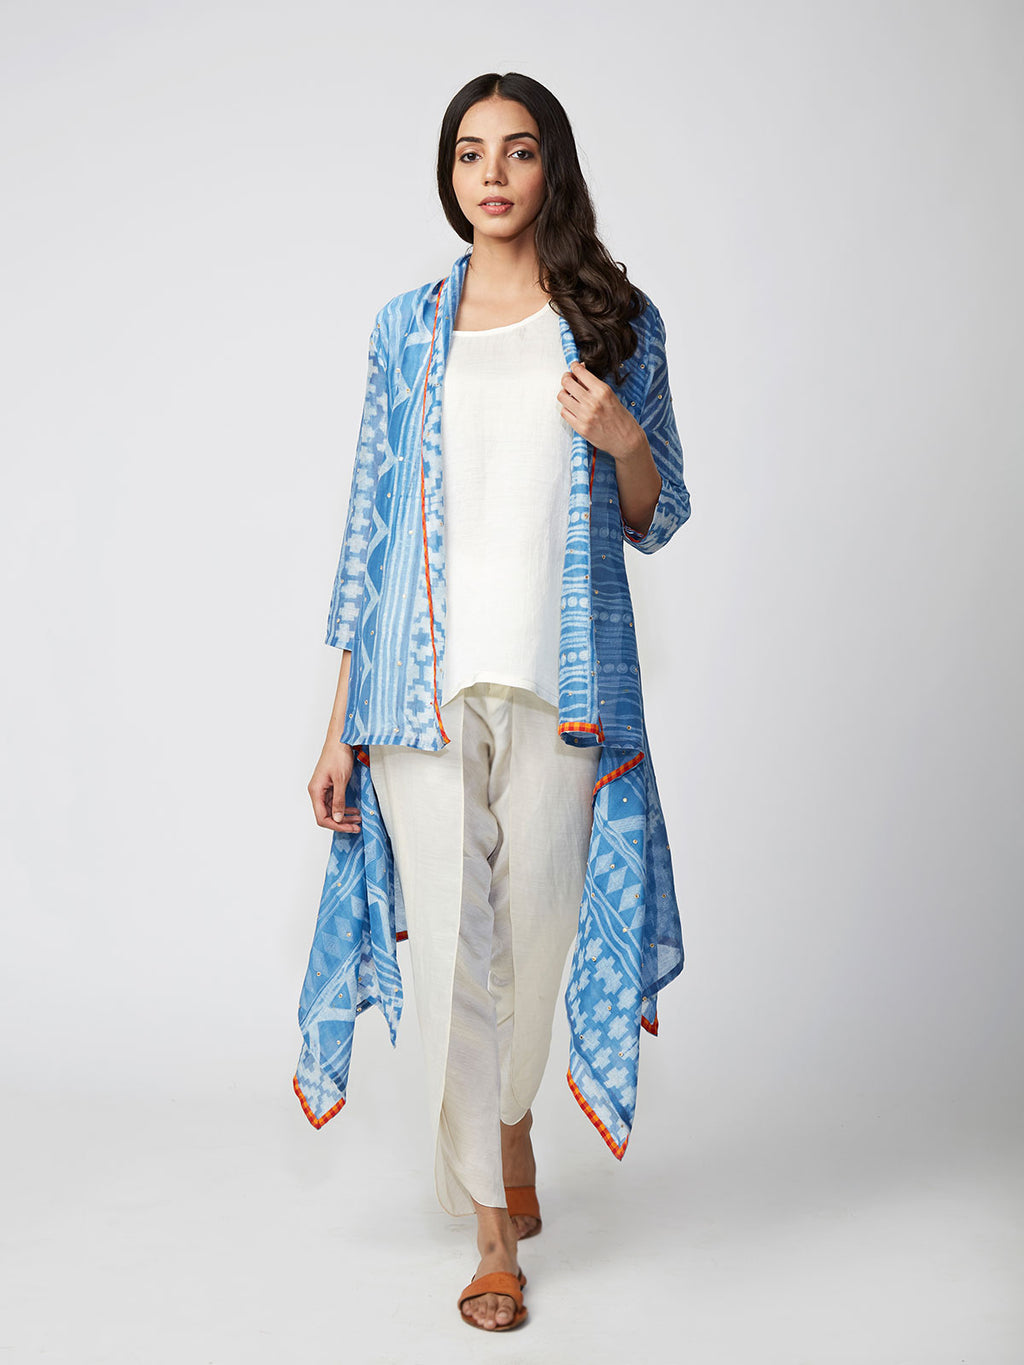 Jacket, capes, indianwear, modern indianwear, contemporary, dhoti pants, shibori, summerstyle